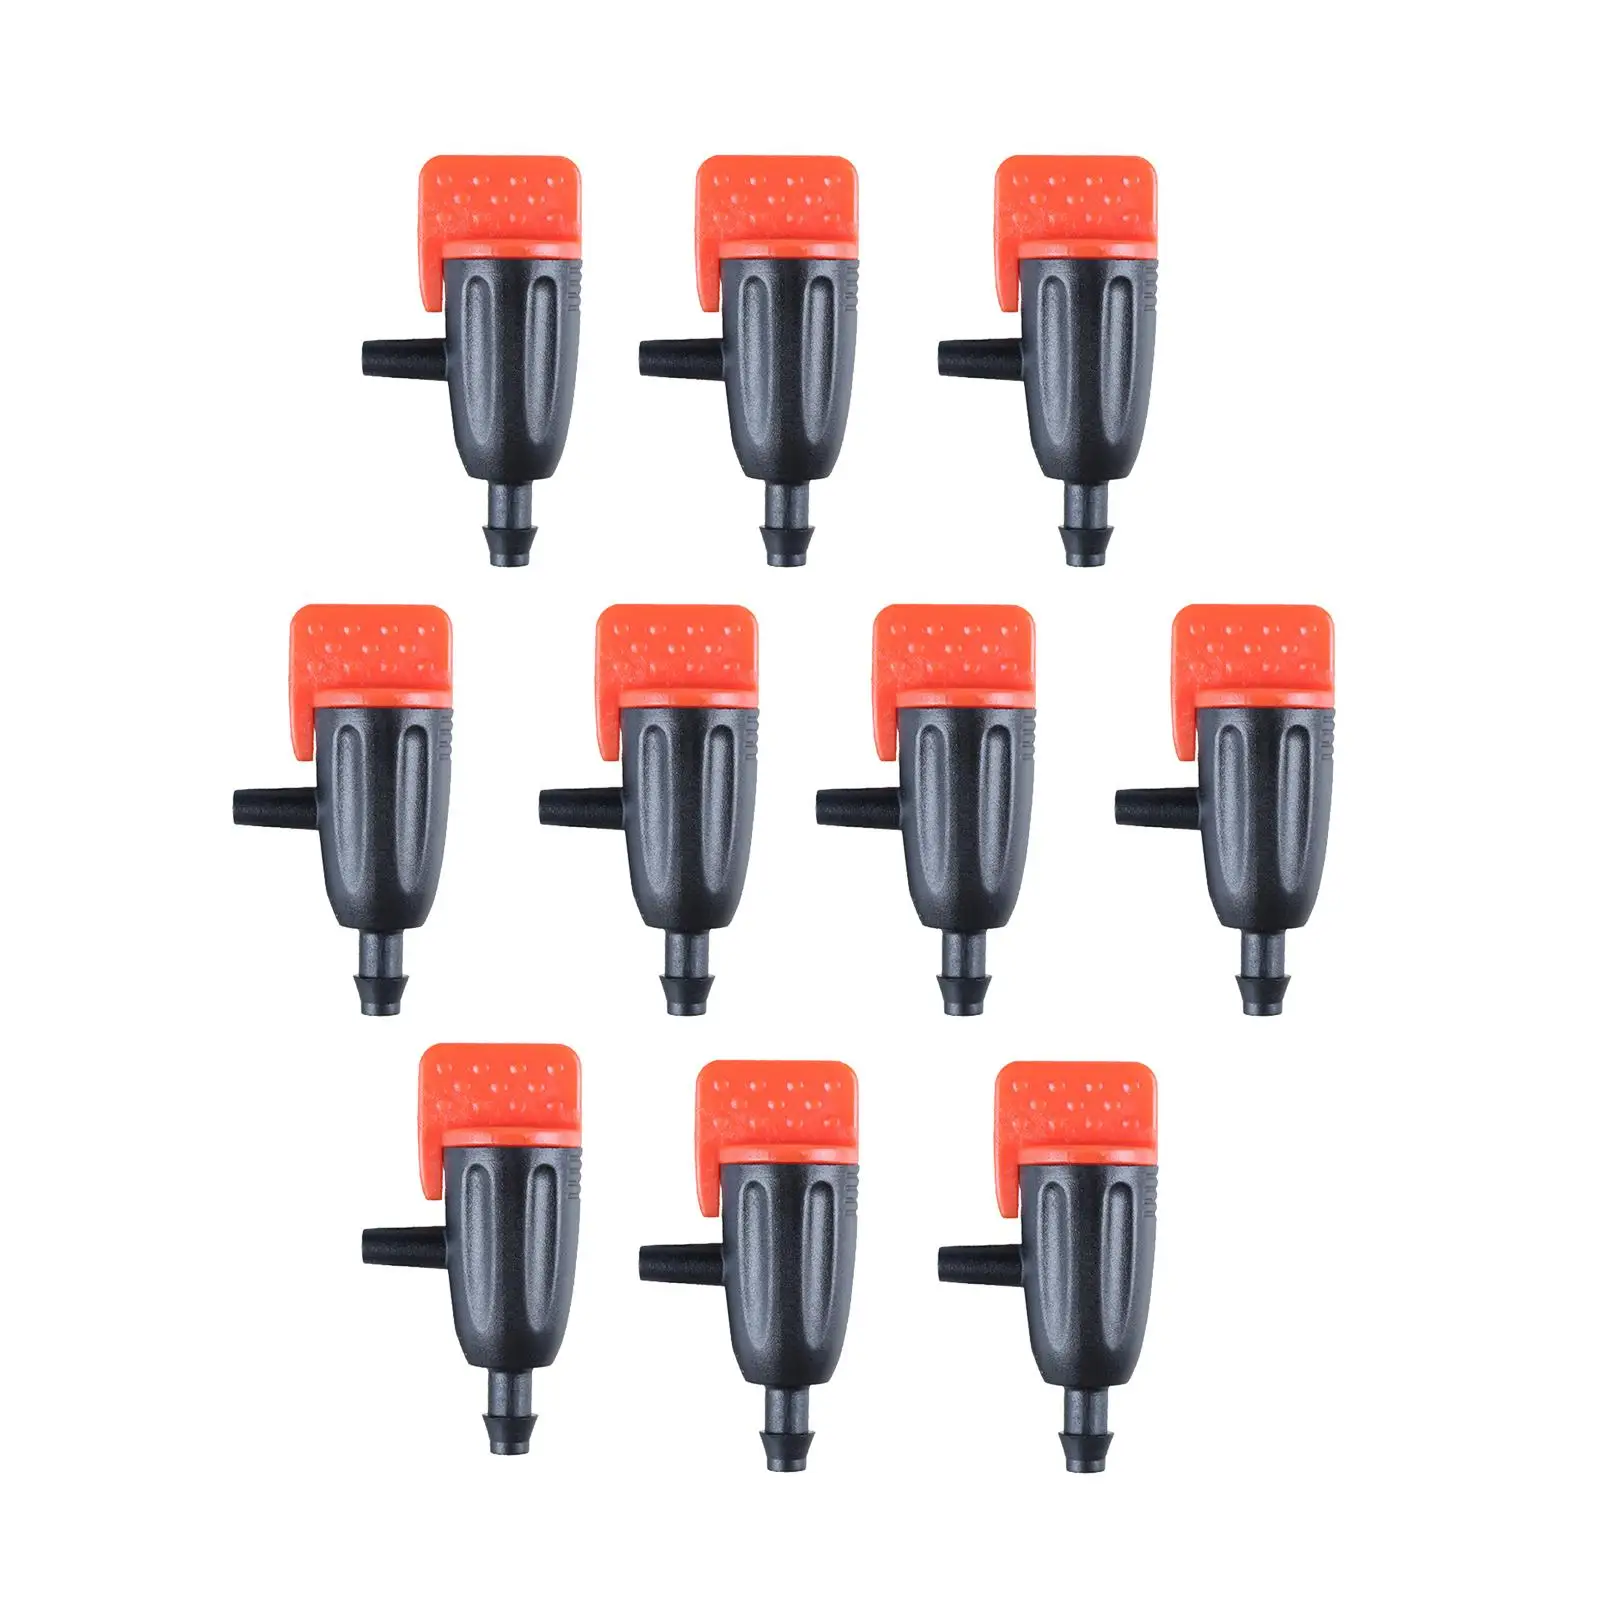 10x Irrigation Dripper Adjustable Watering System Garden Supplies Sprinklers Gardens for 4/7mm Tubing 1/4'' Parts Micro Drips